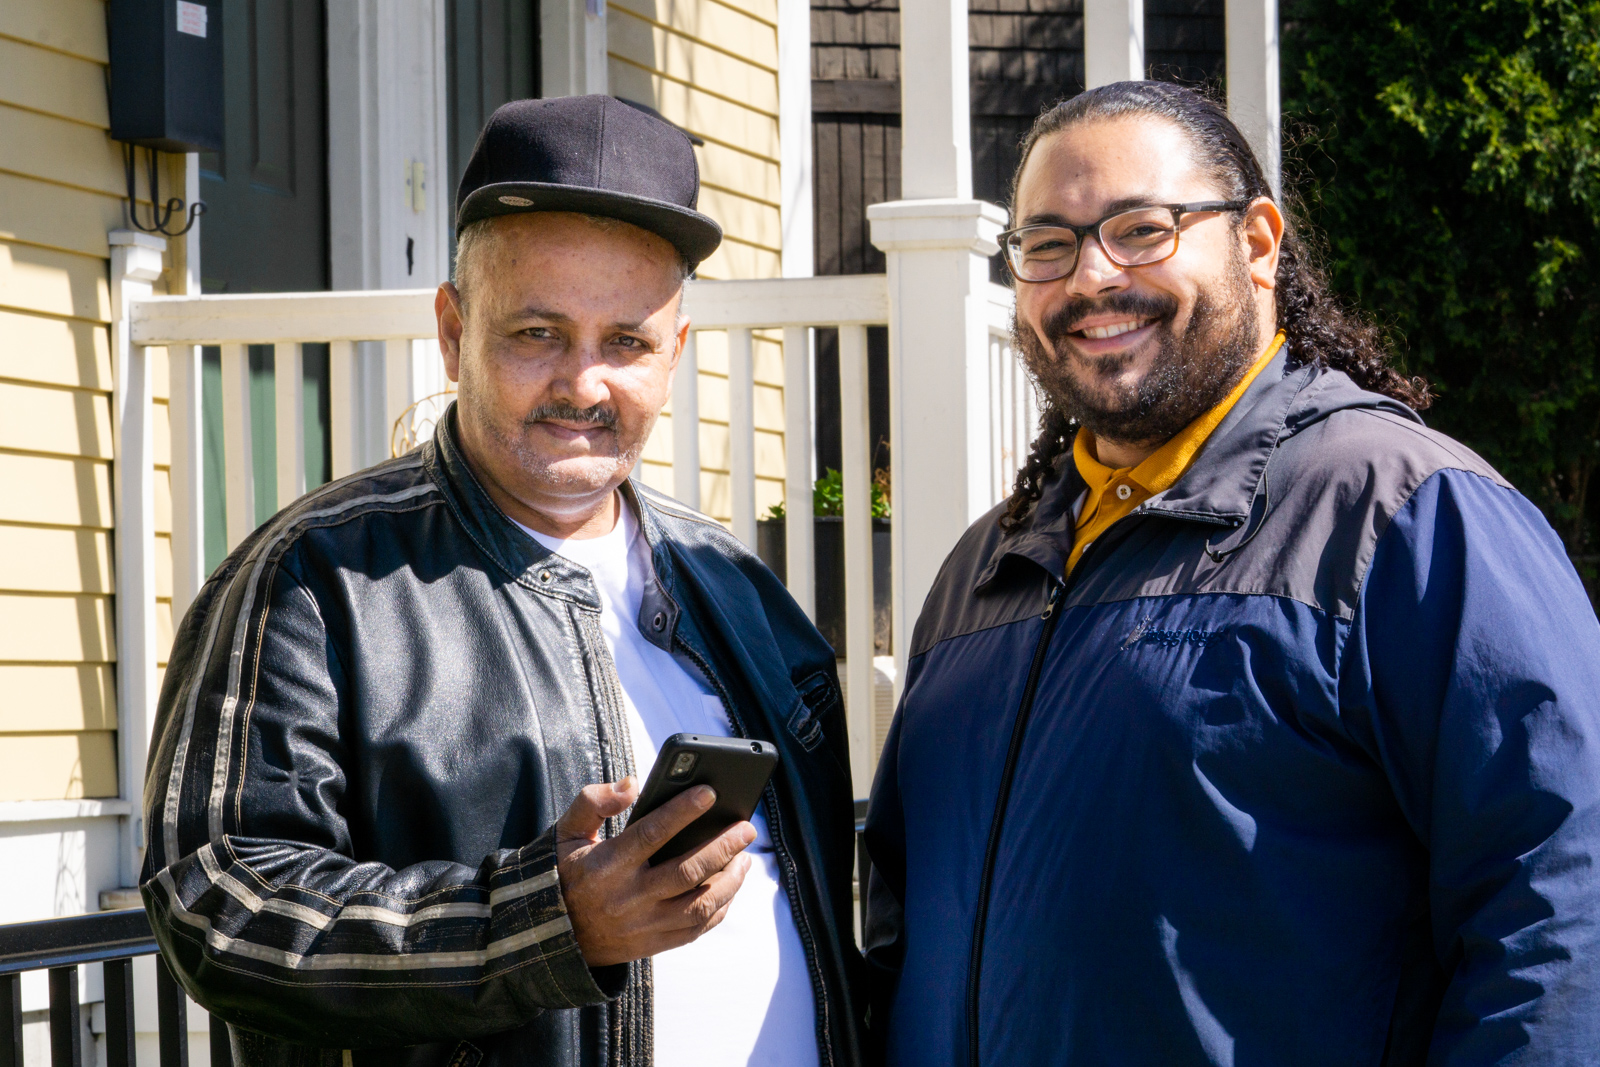 Harry Quiñones, left, of Providence, works with Antonio Rodriguez, ONE|NB’s Assistant Director of Asset Management, ensuring he's fully connected to the free neighborhood WiFi.